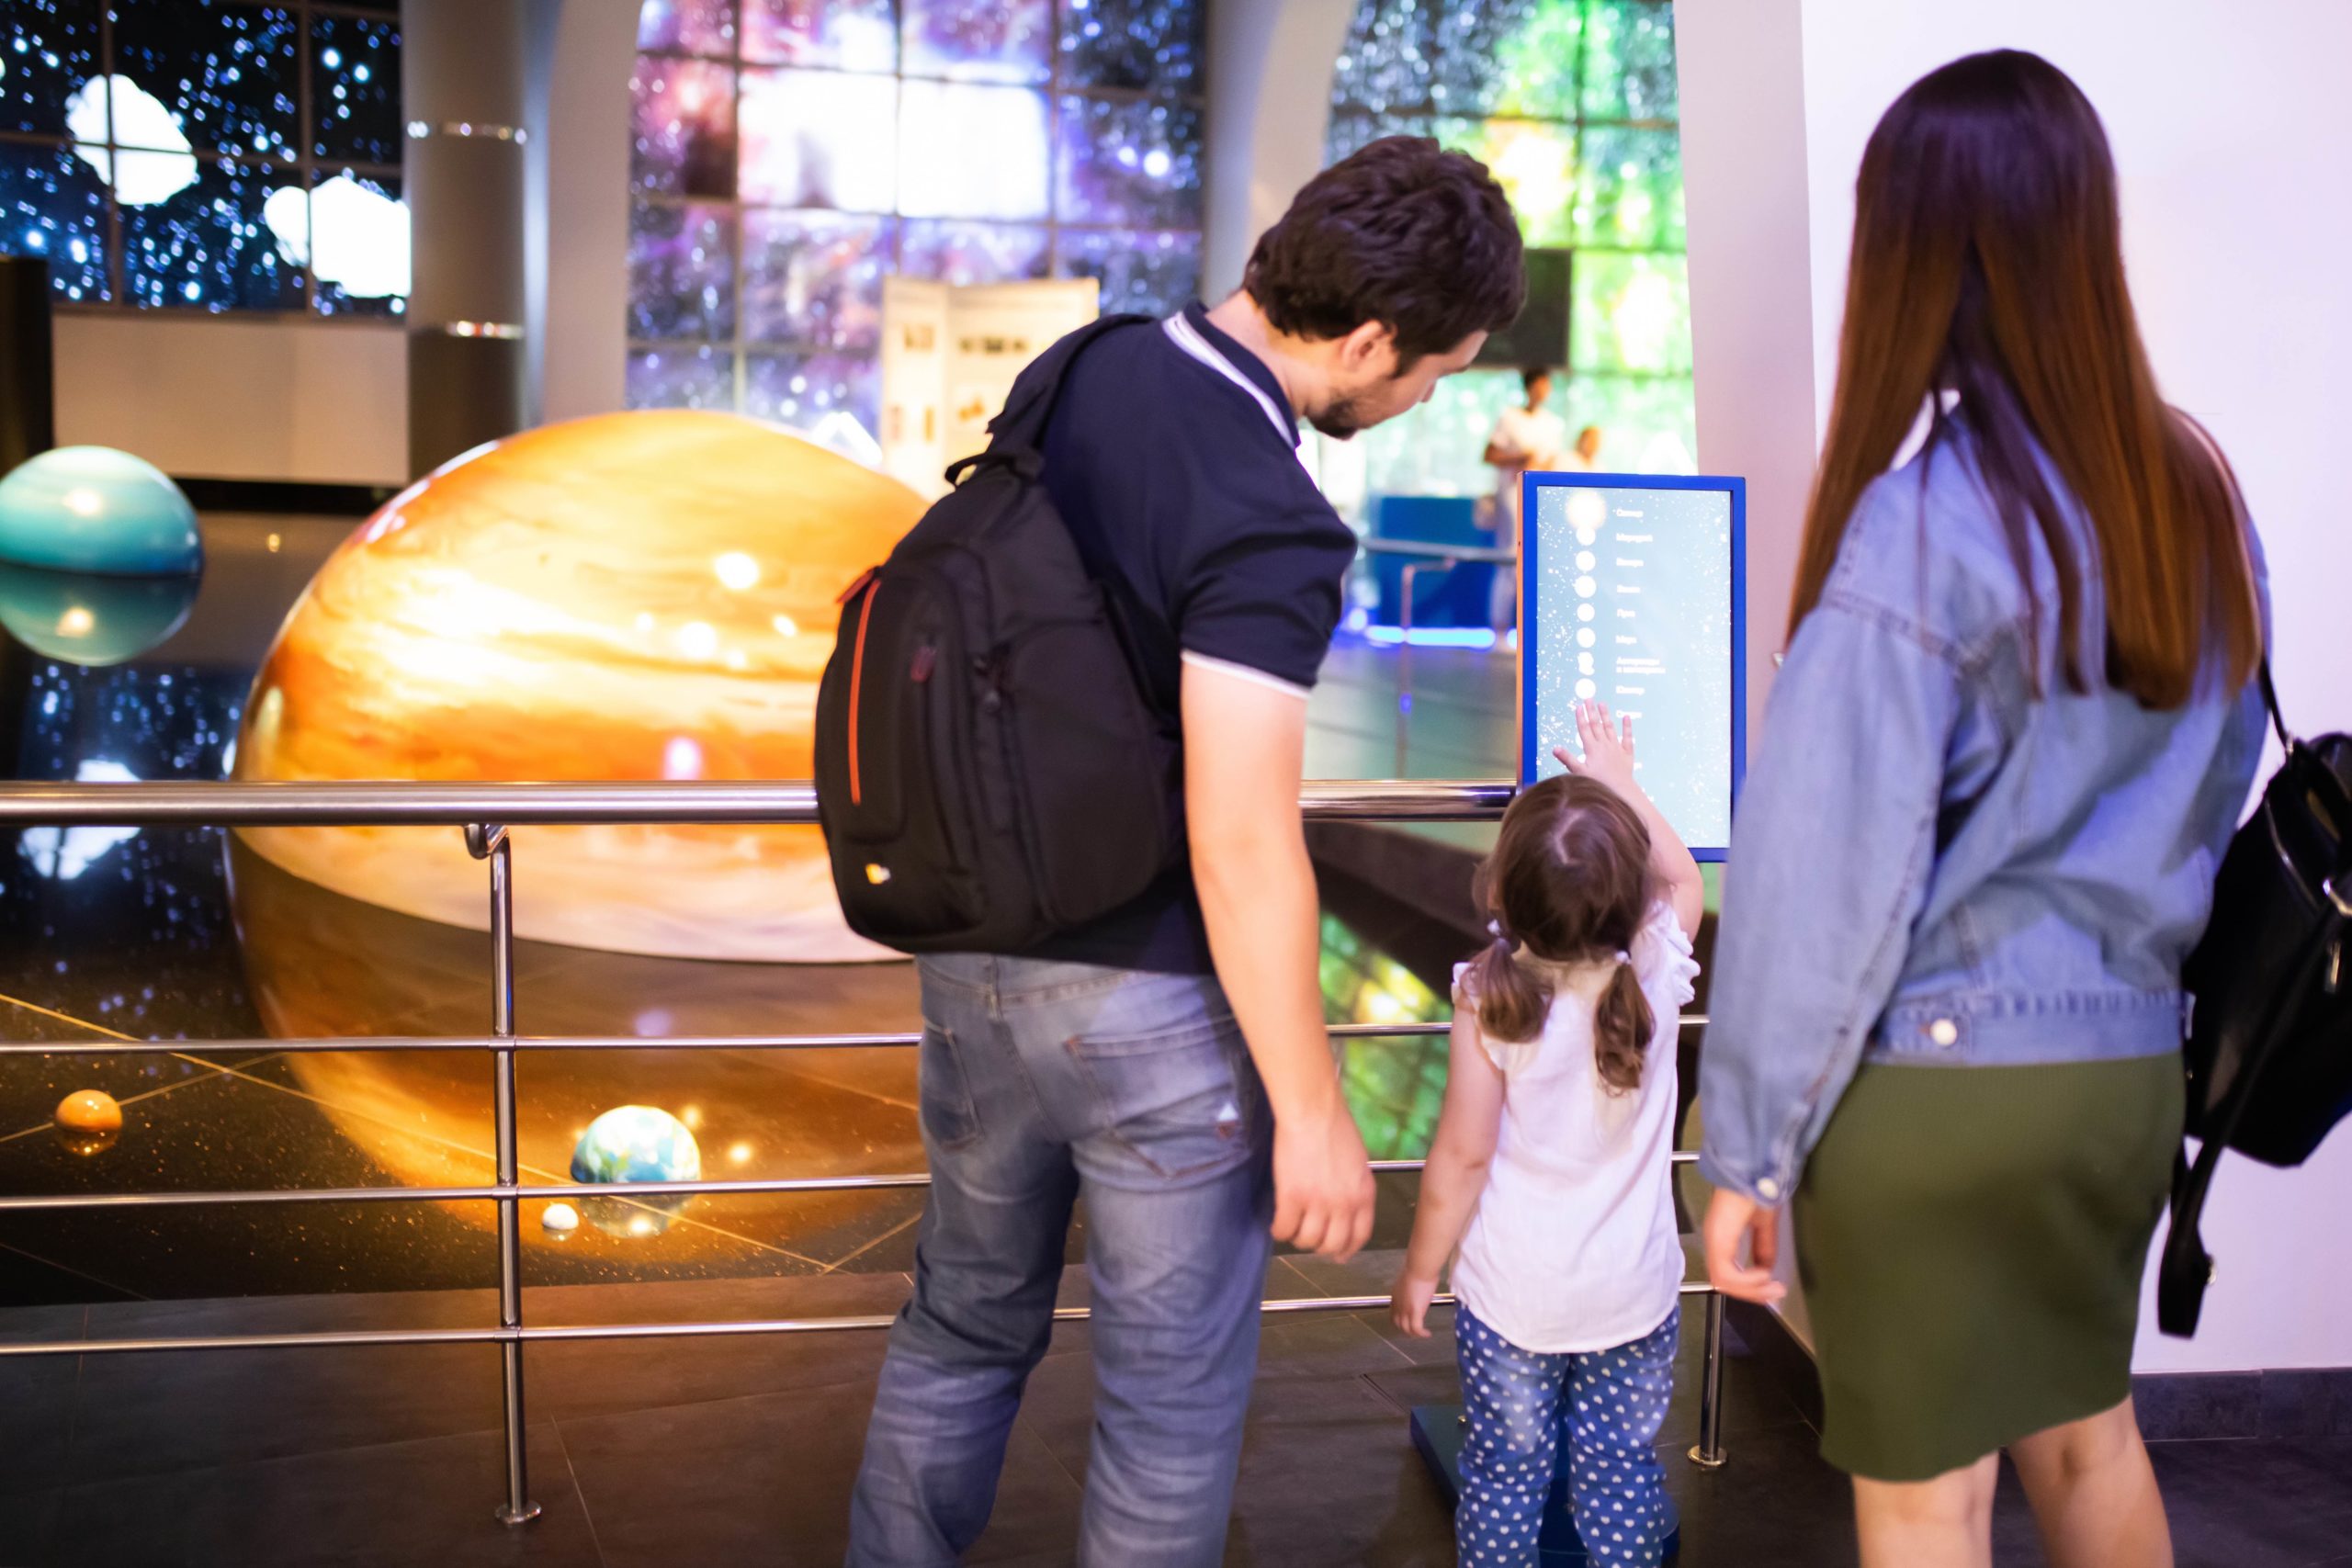 A family observing a planet display at a planetarium museum